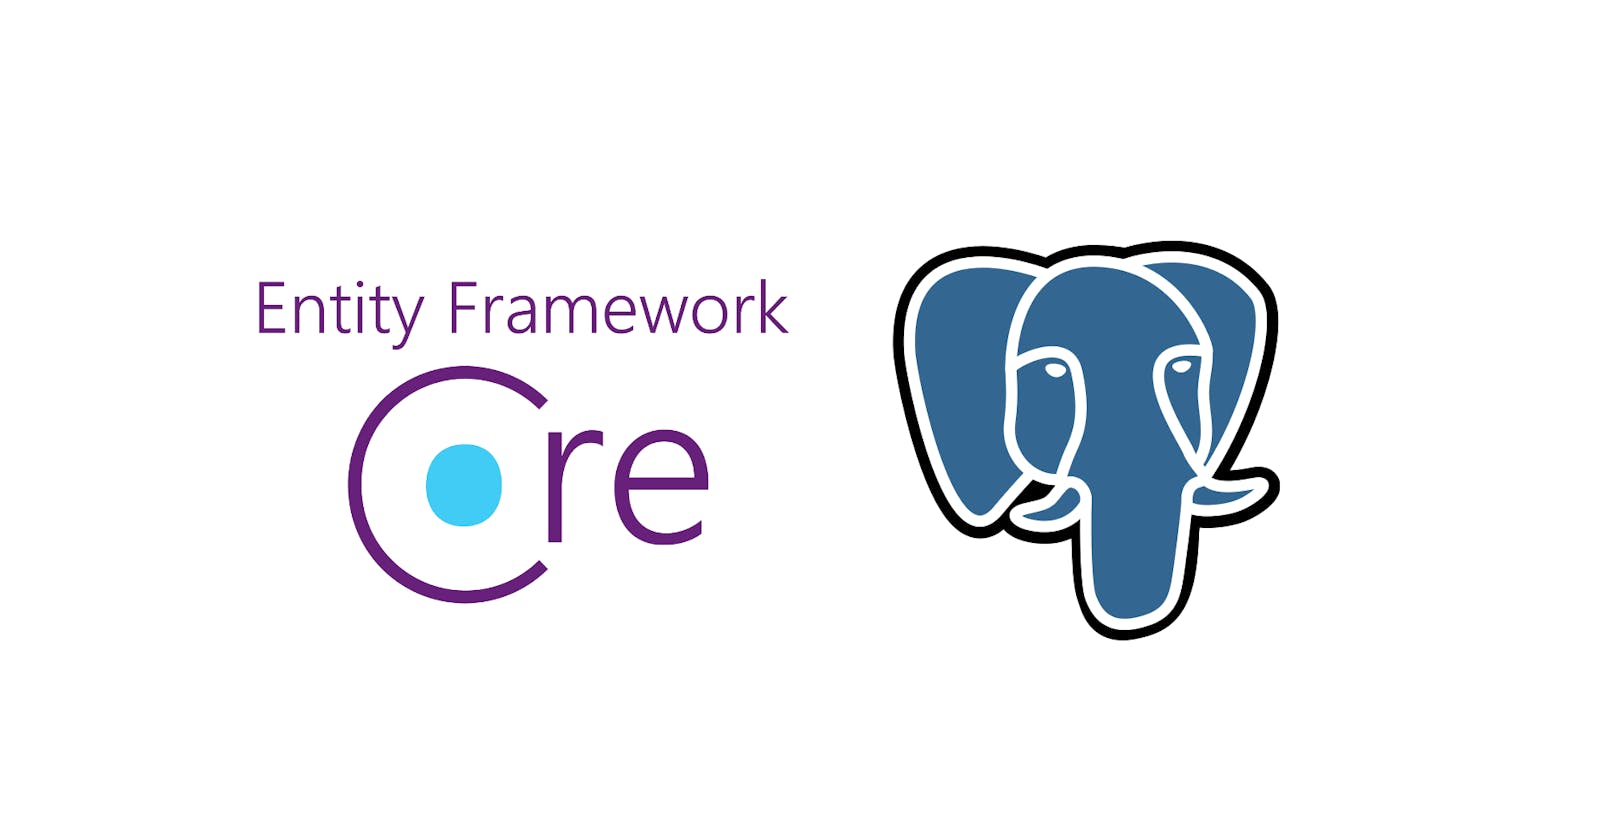 EF Core and PostgreSQL: Working with JSON Data